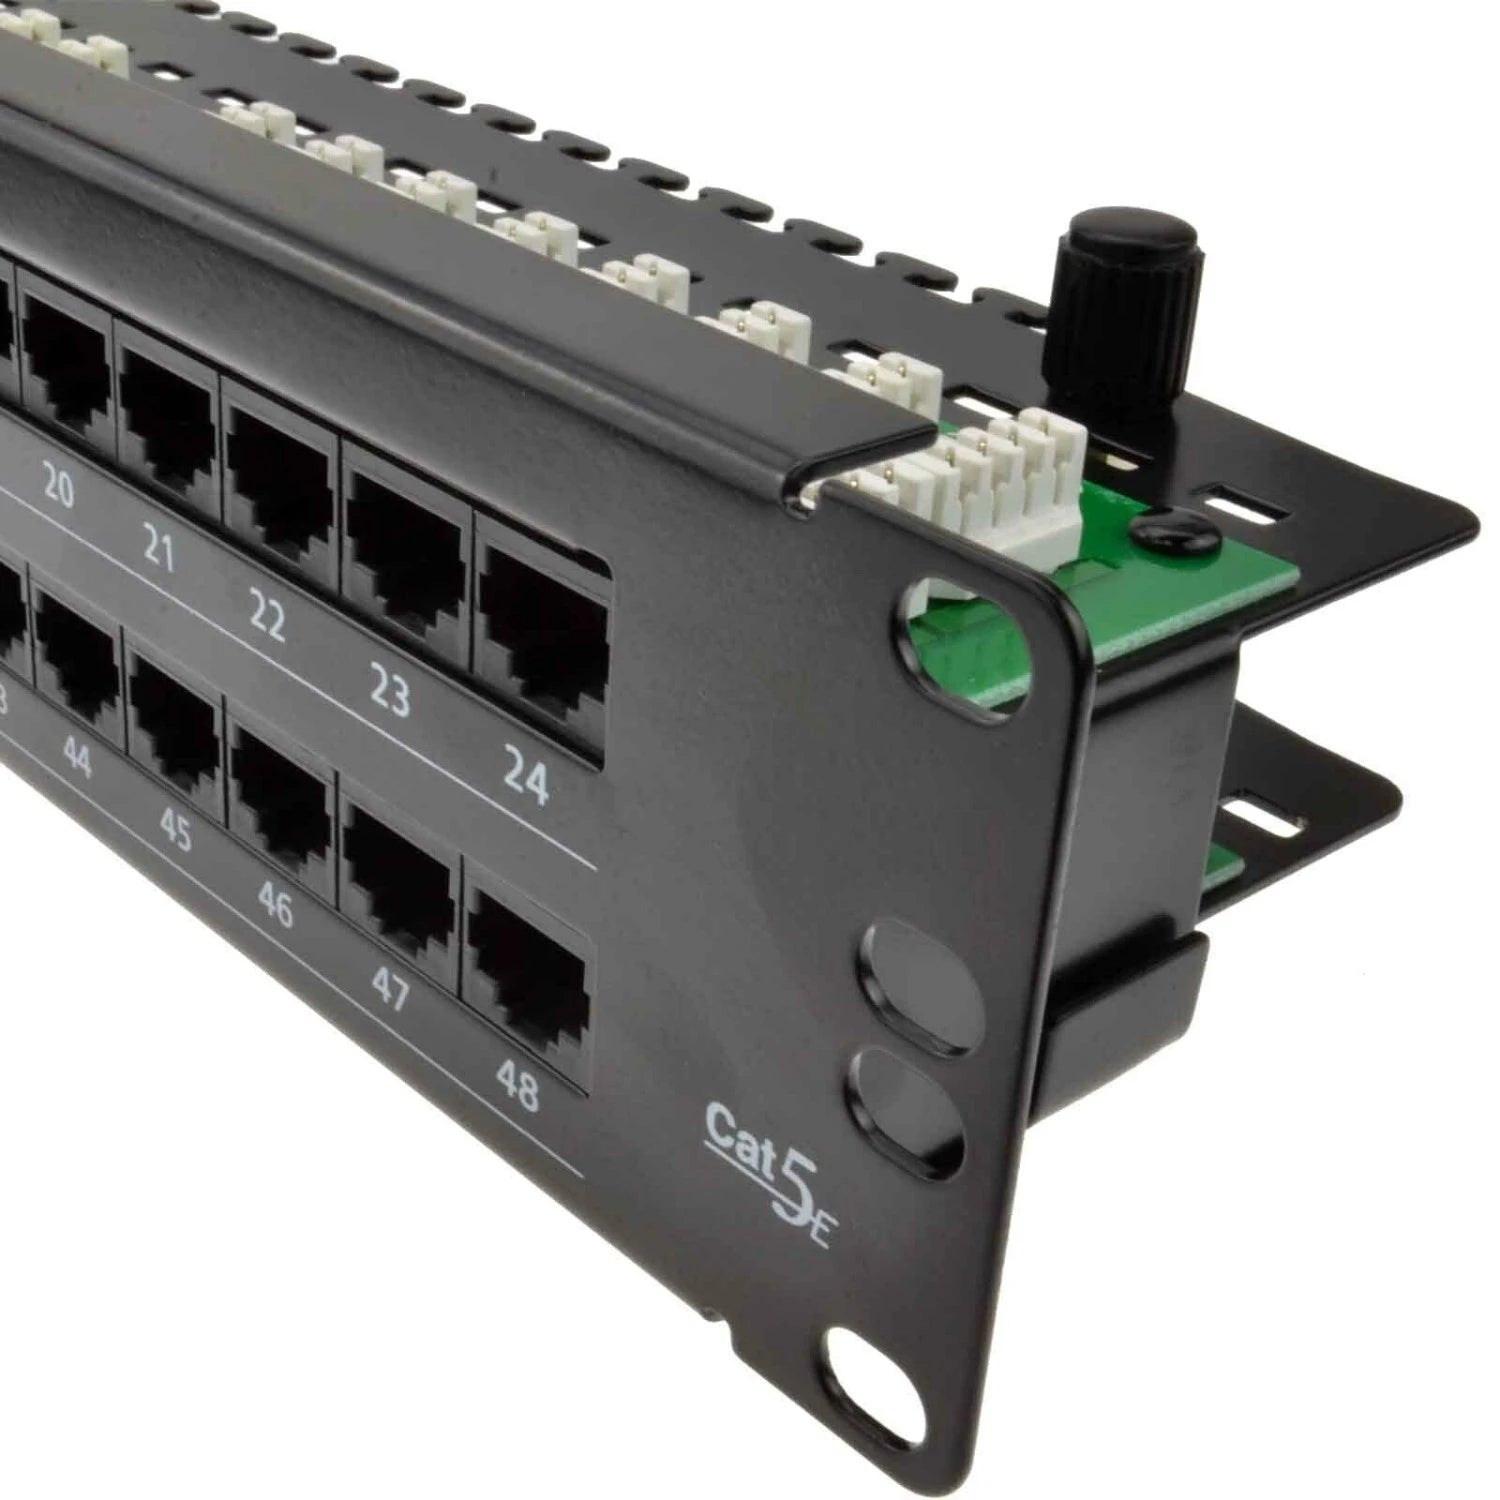 PPAN-48-LC Patch Panel